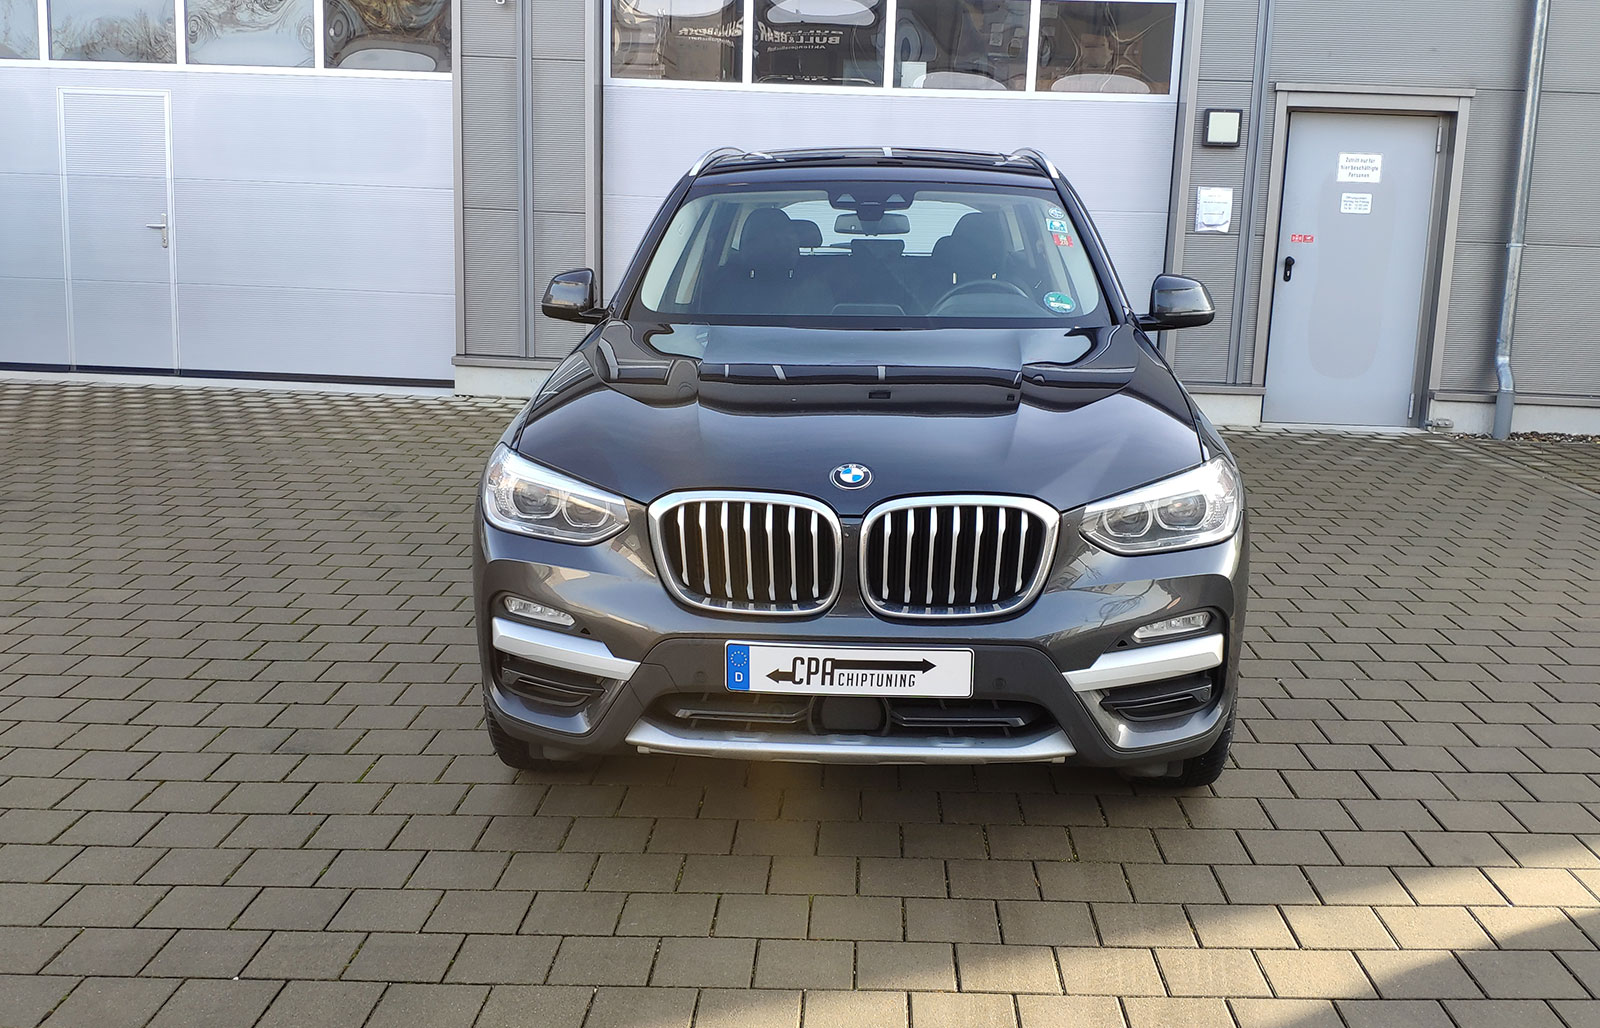 The BMW X3 (G01) xDrive20d in test